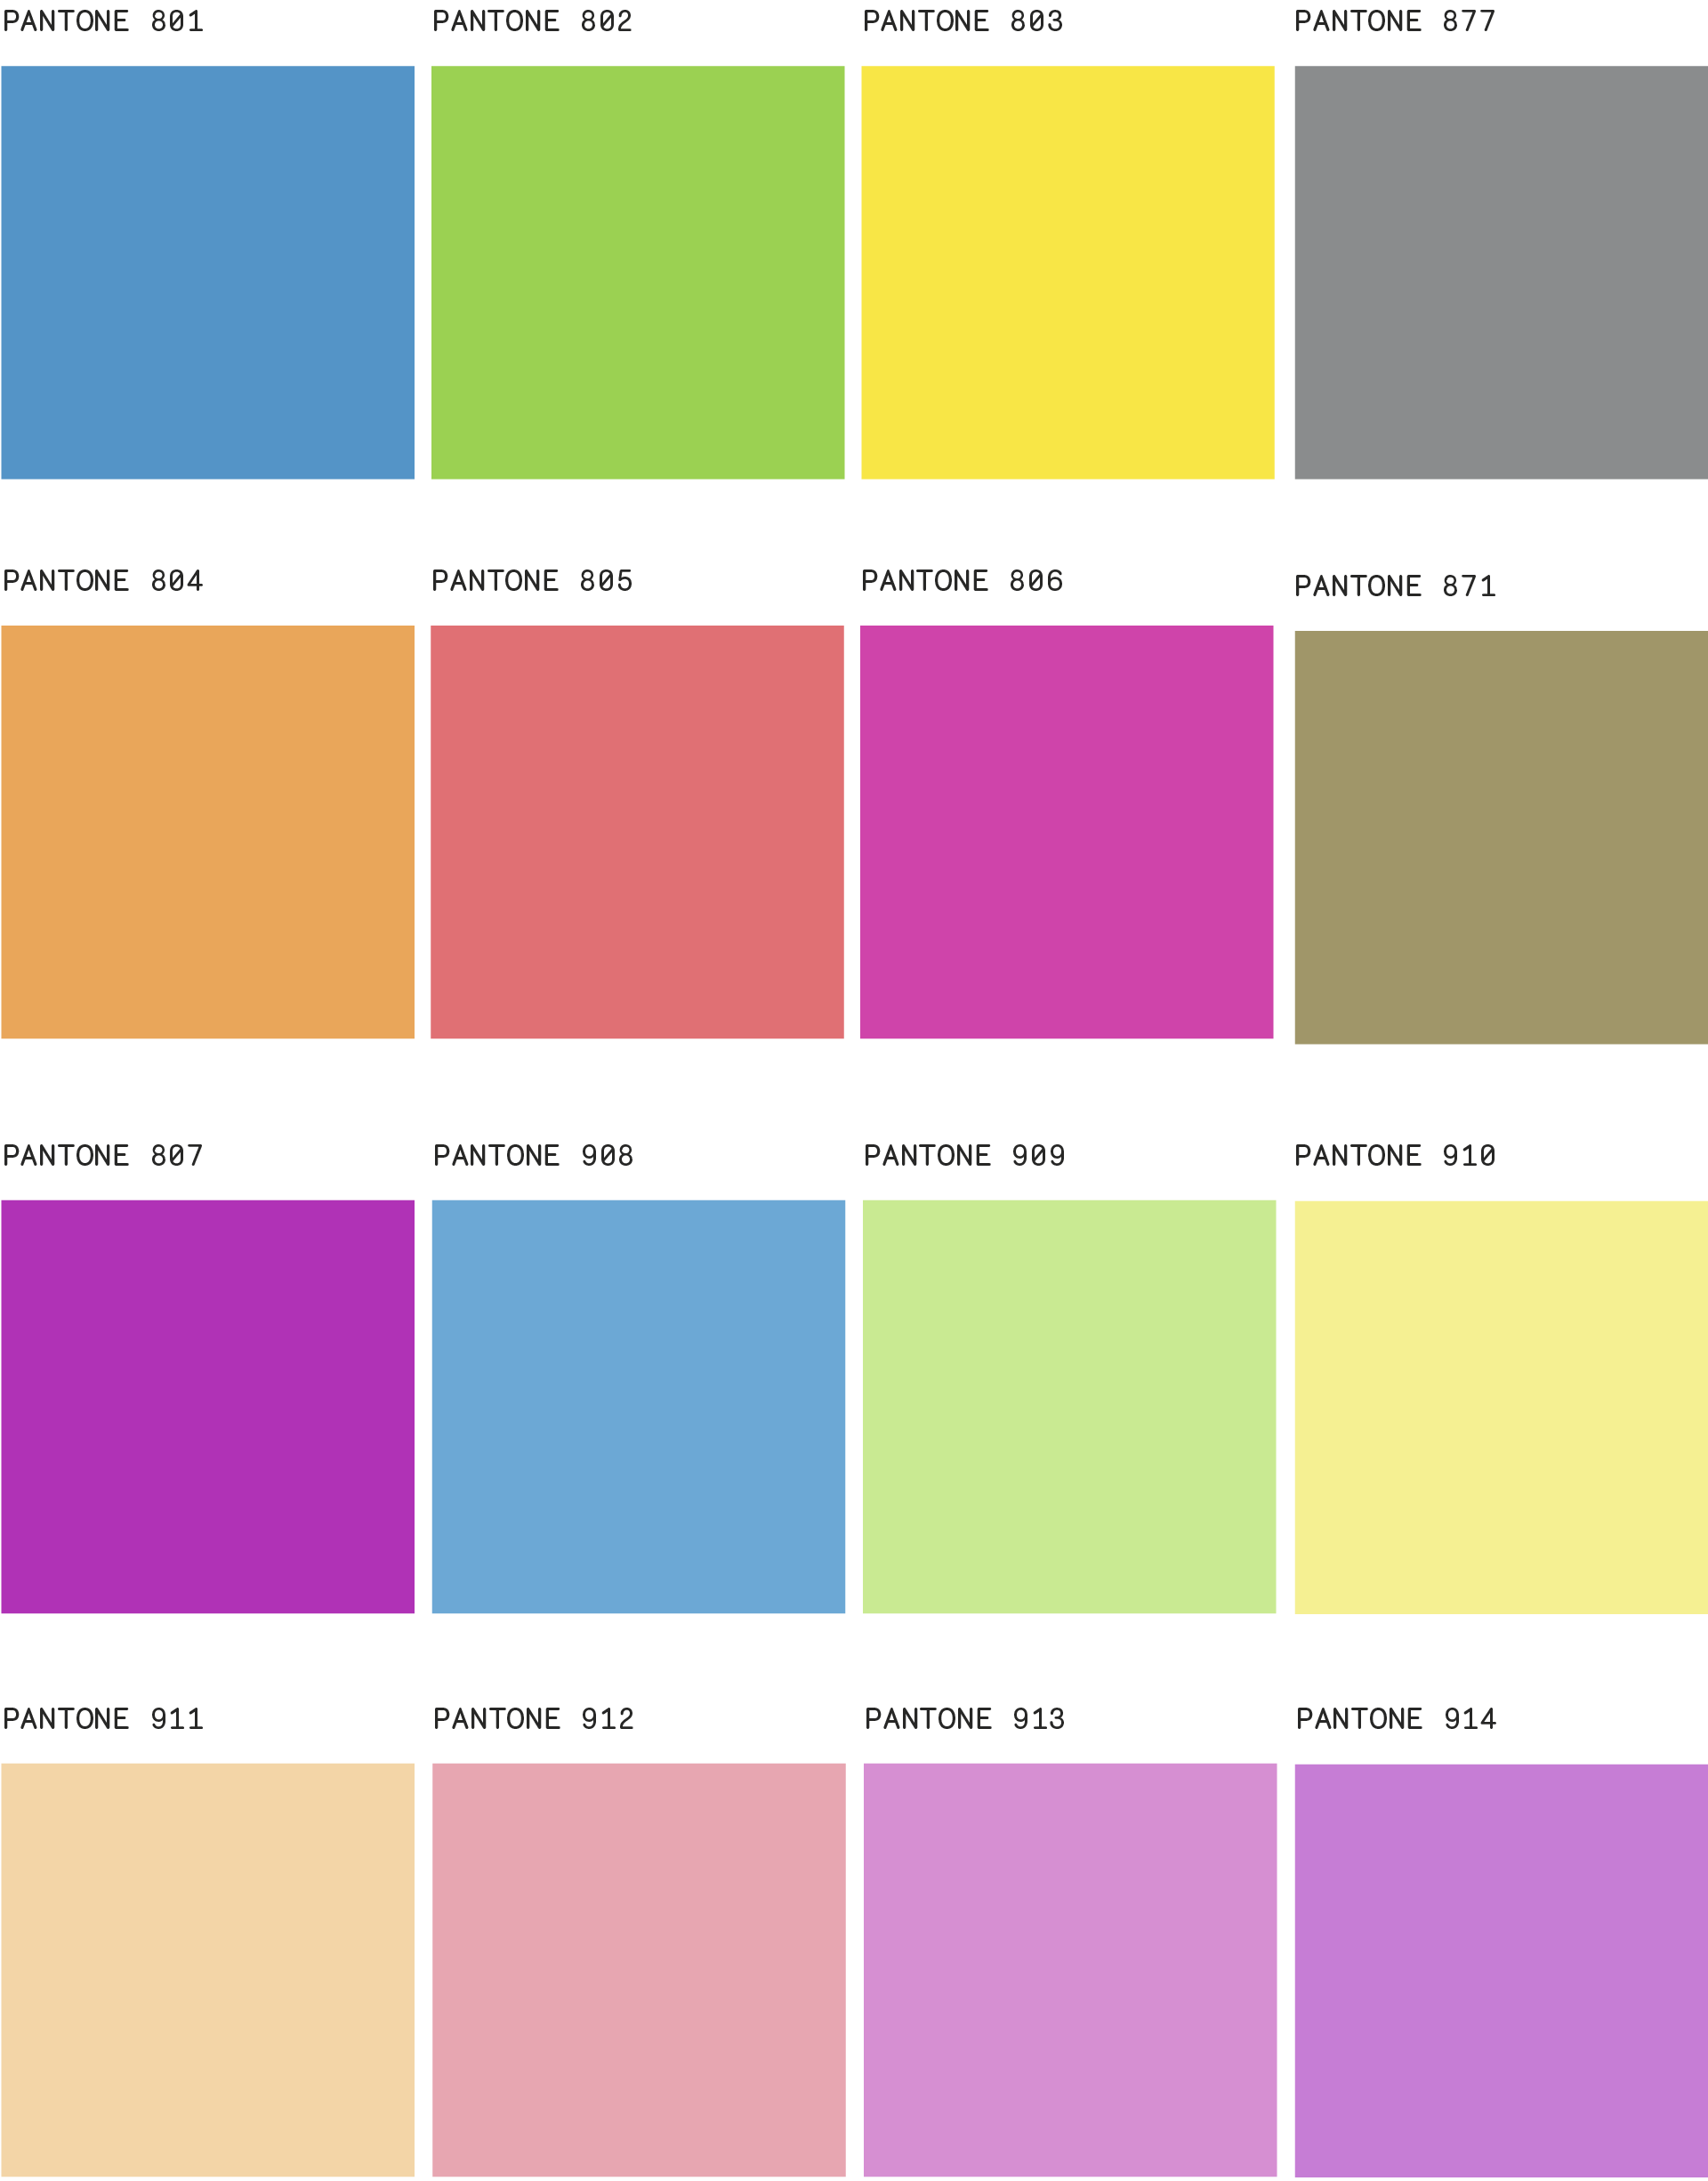 Image shows different coloured squares with their correspondent technical codes.